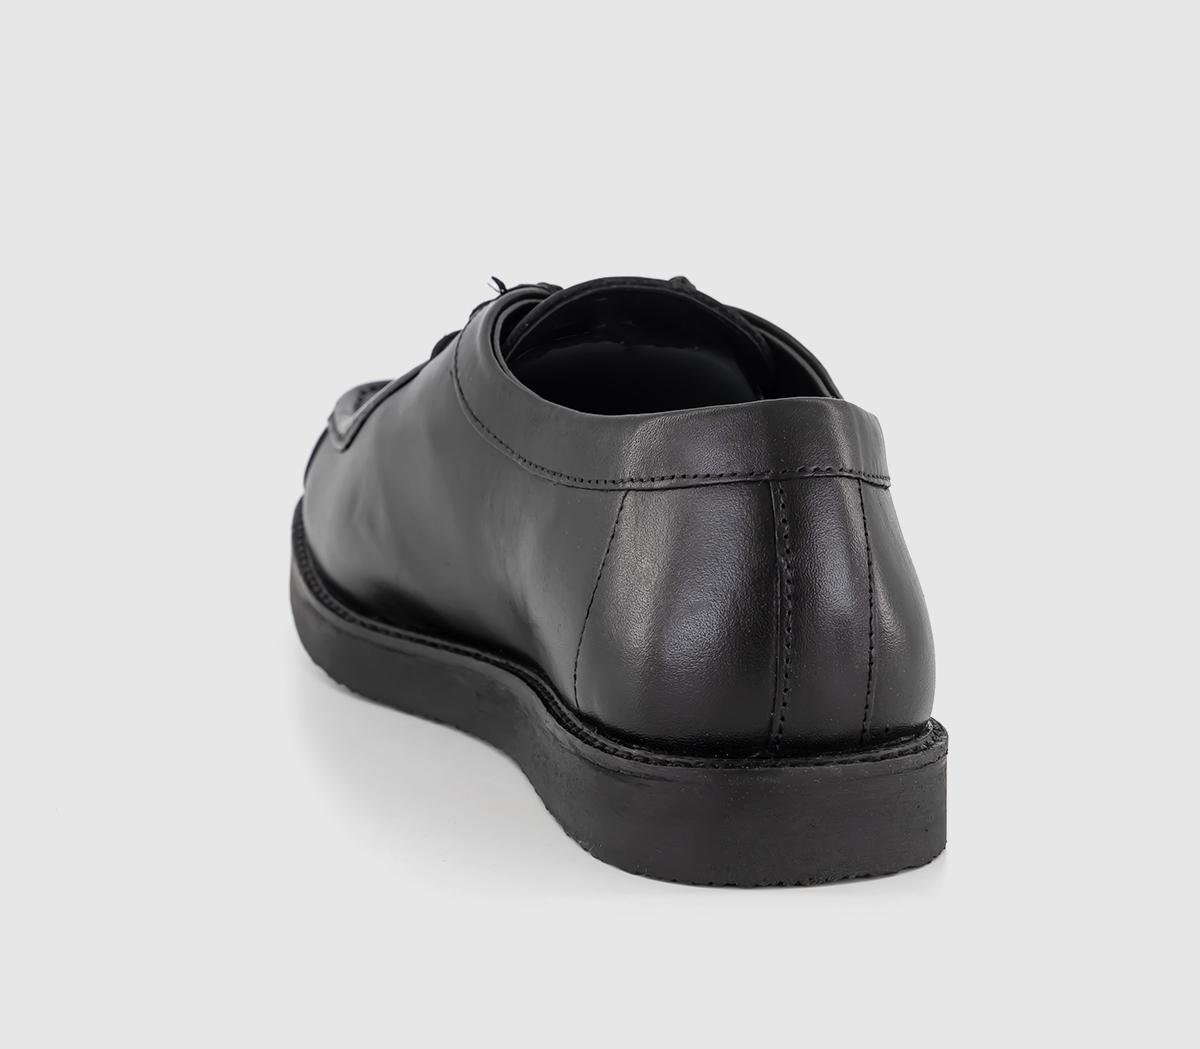 OFFICE Chelmsford Stitch Apron Shoes Black Leather - School Shoes and ...